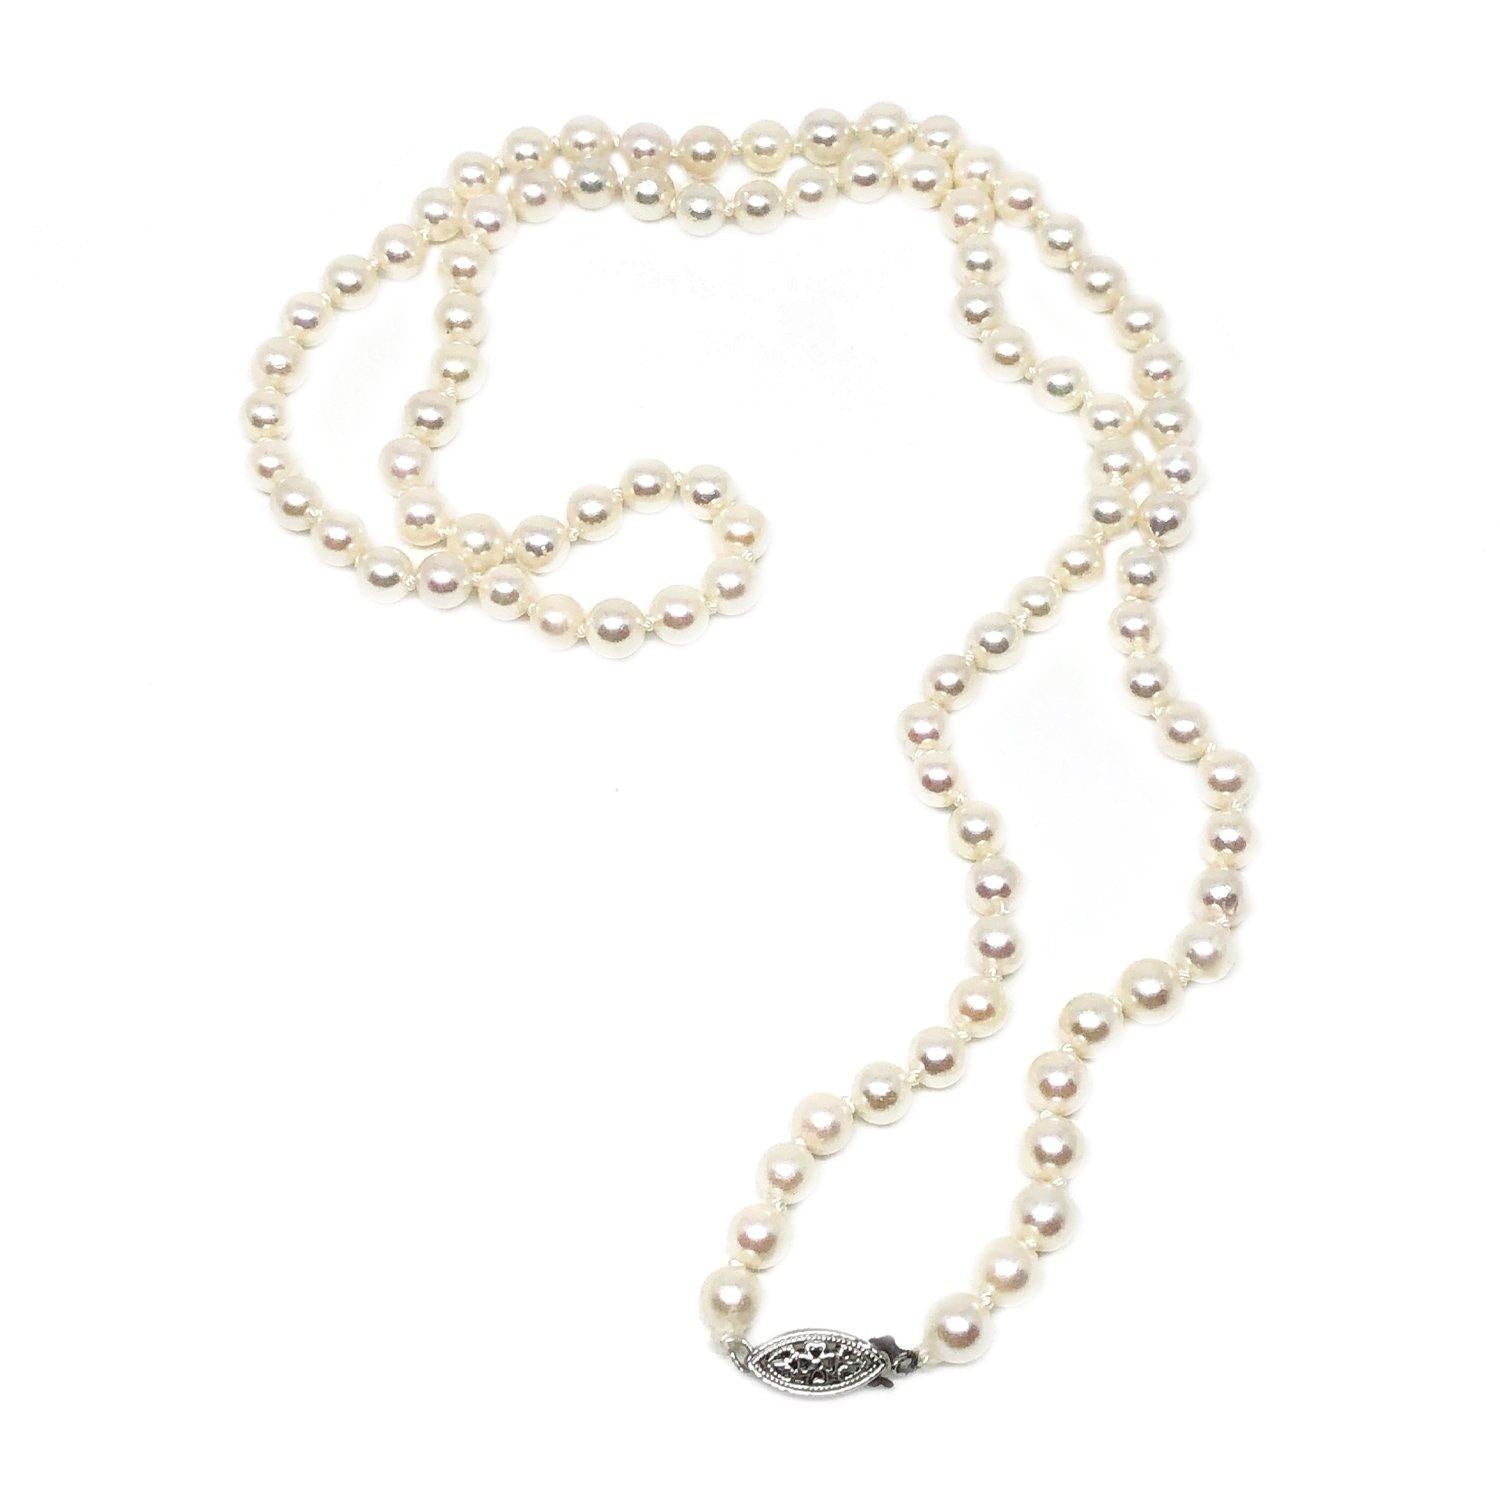 Imperial Mid Century Modern Japanese Cultured Akoya Pearl Strand - 14K White Gold 25 Inch